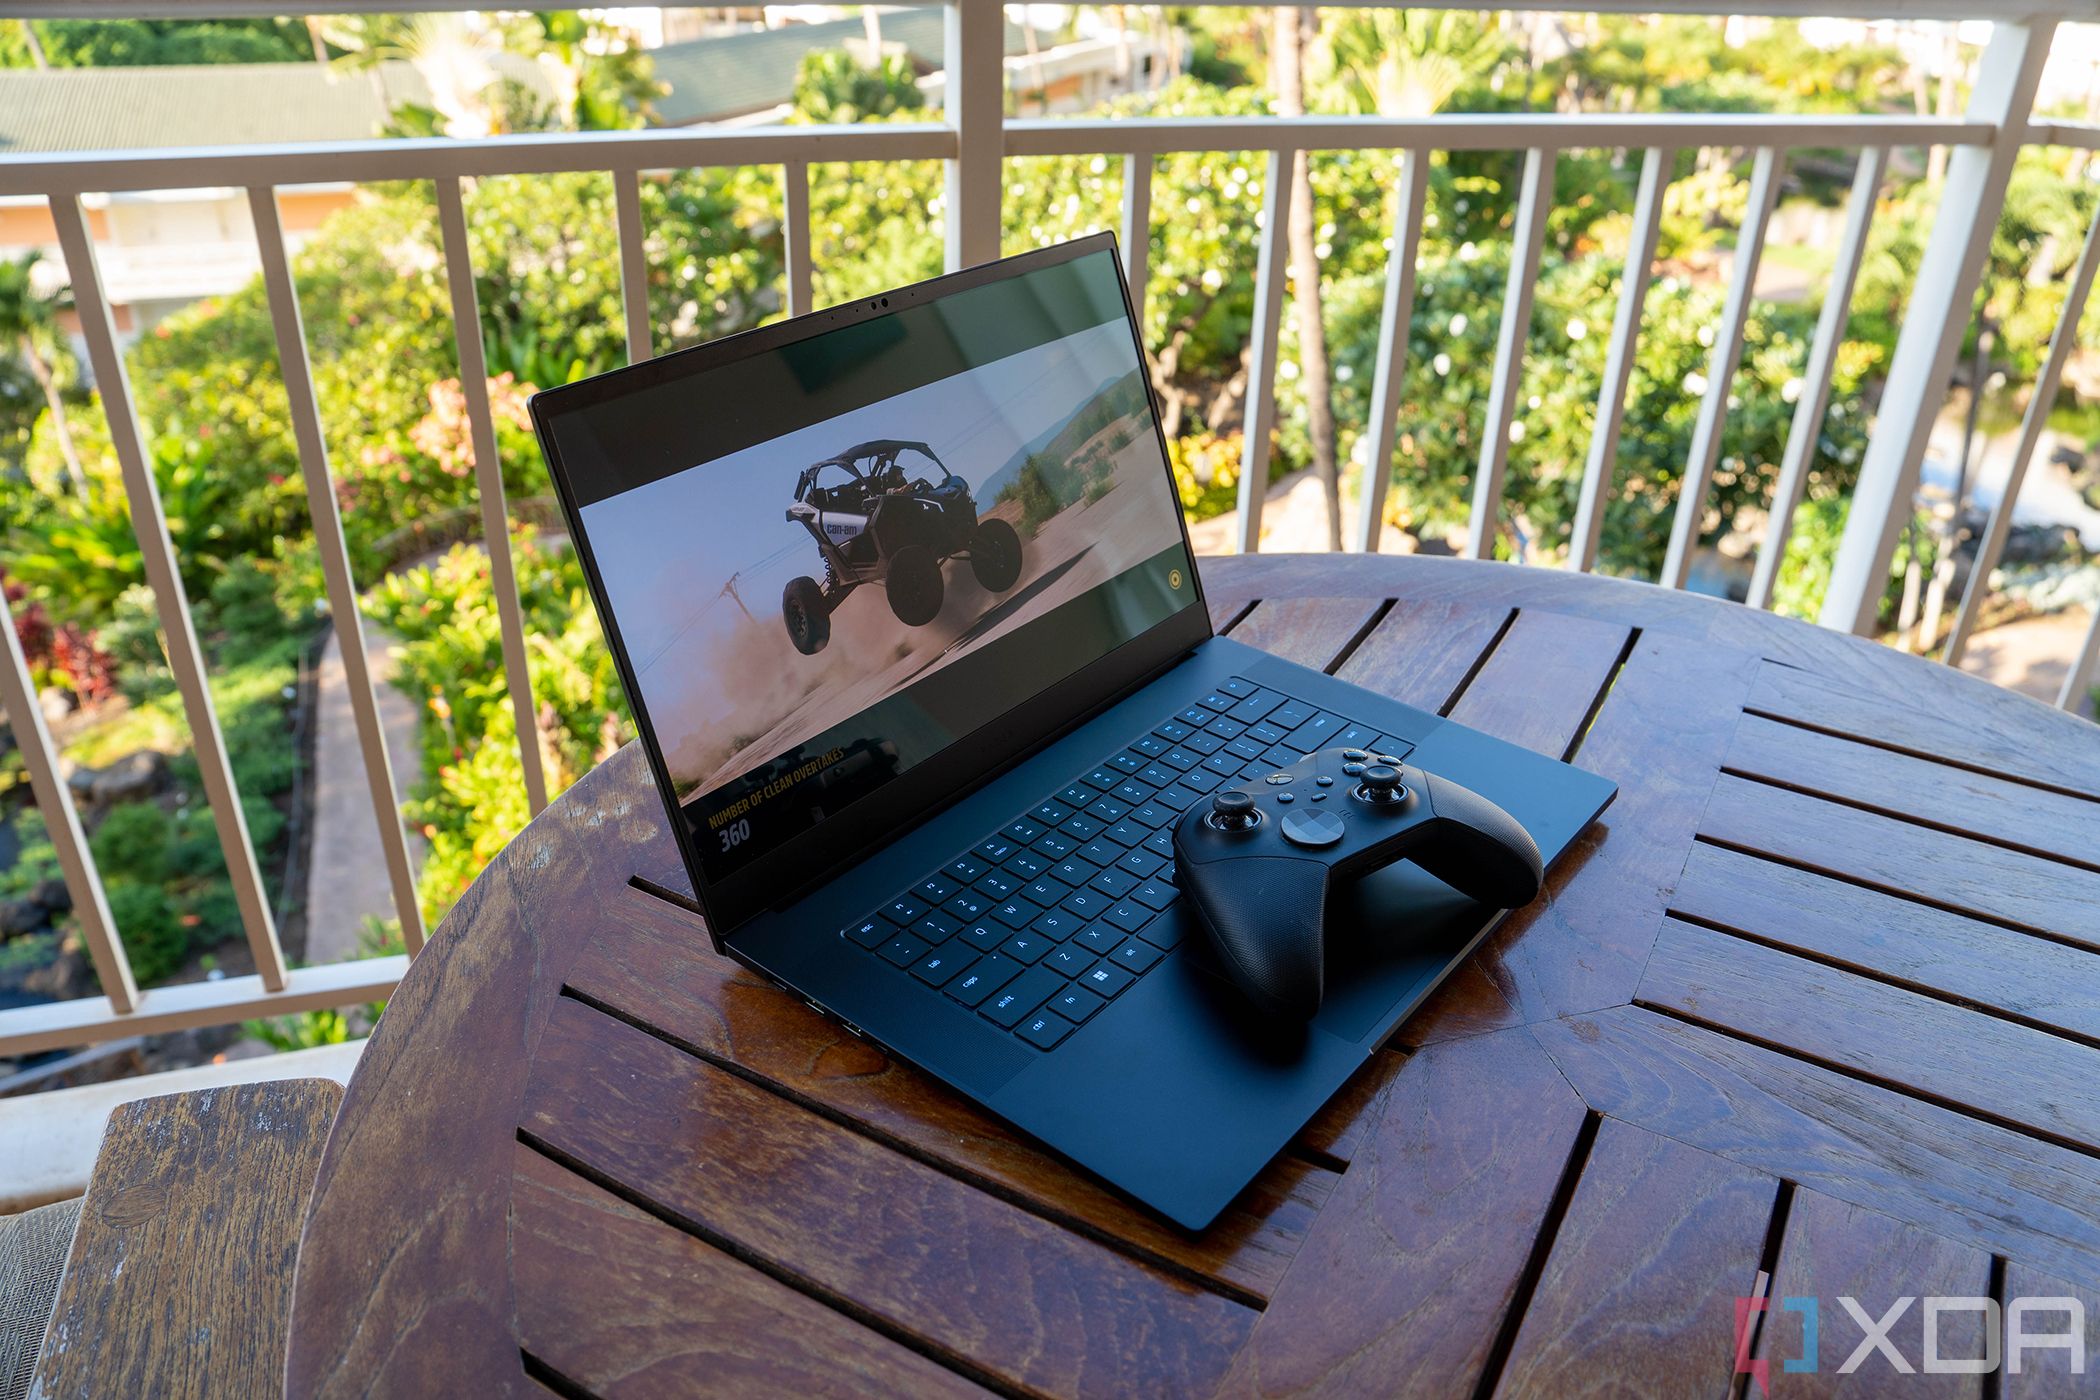 Angled view of black laptop with game controller on wooden table